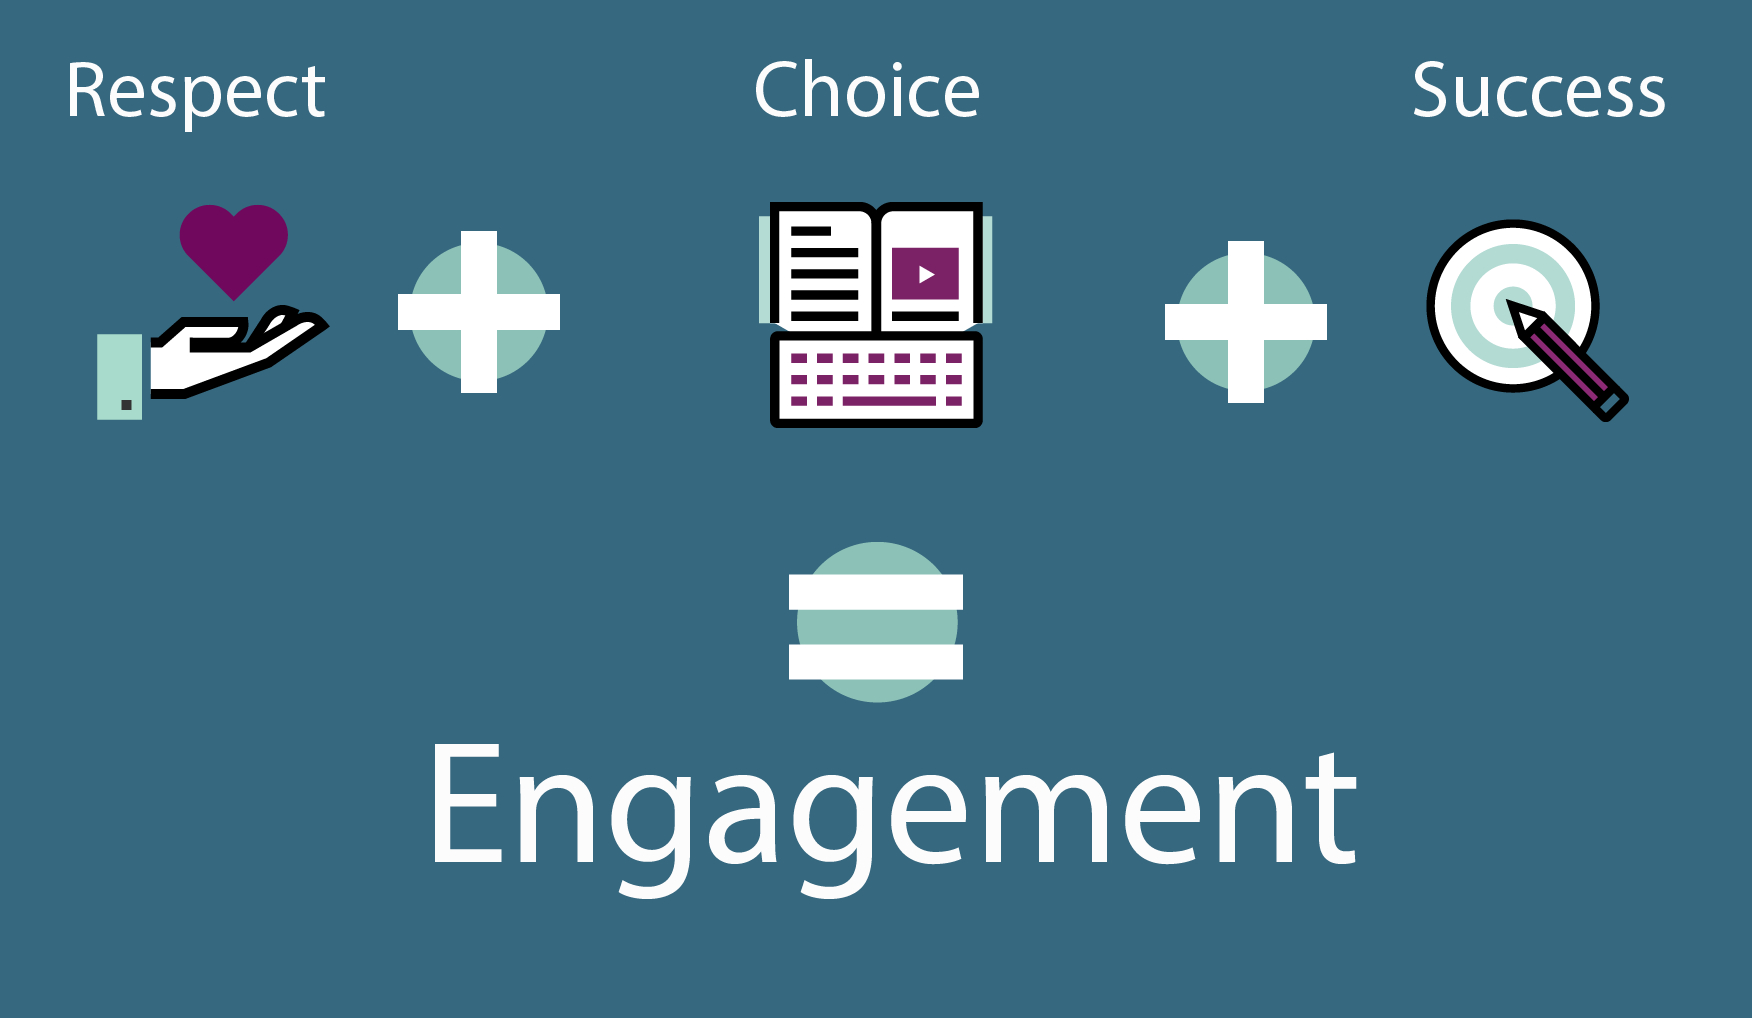 The Engagement Equation